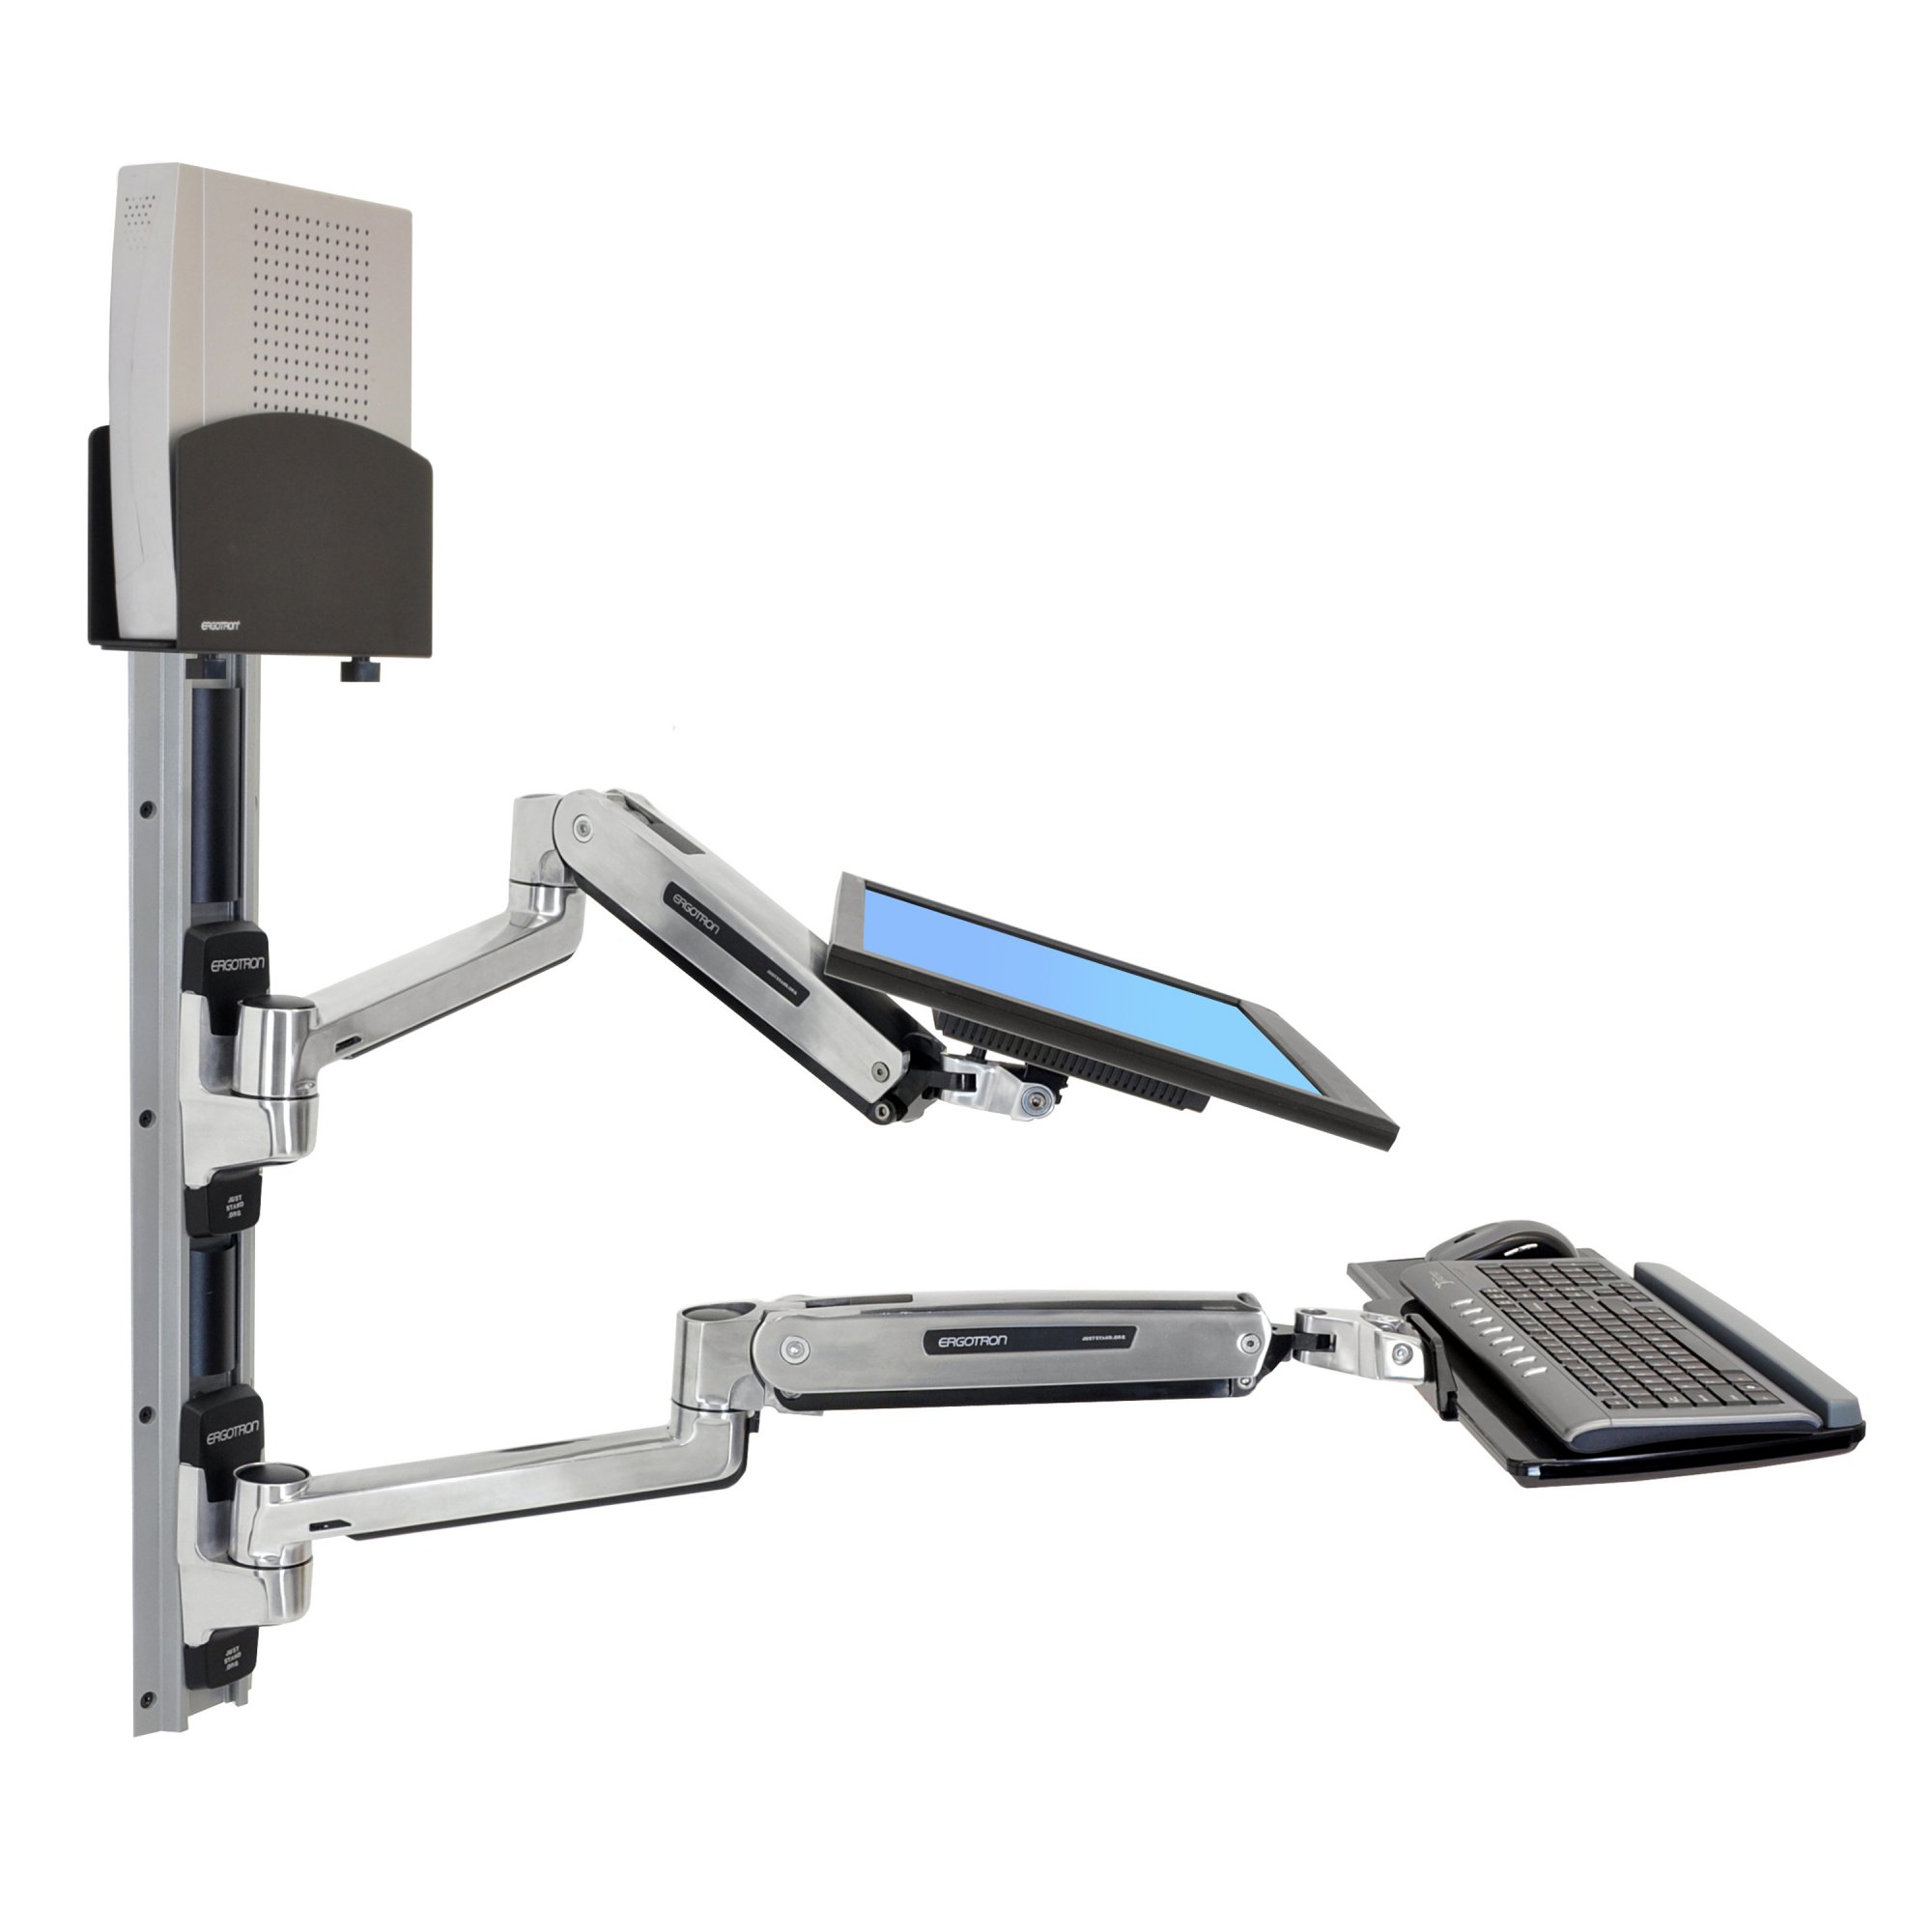 Ergotron 45-359-026 LX Sit-Stand Wall Mount System